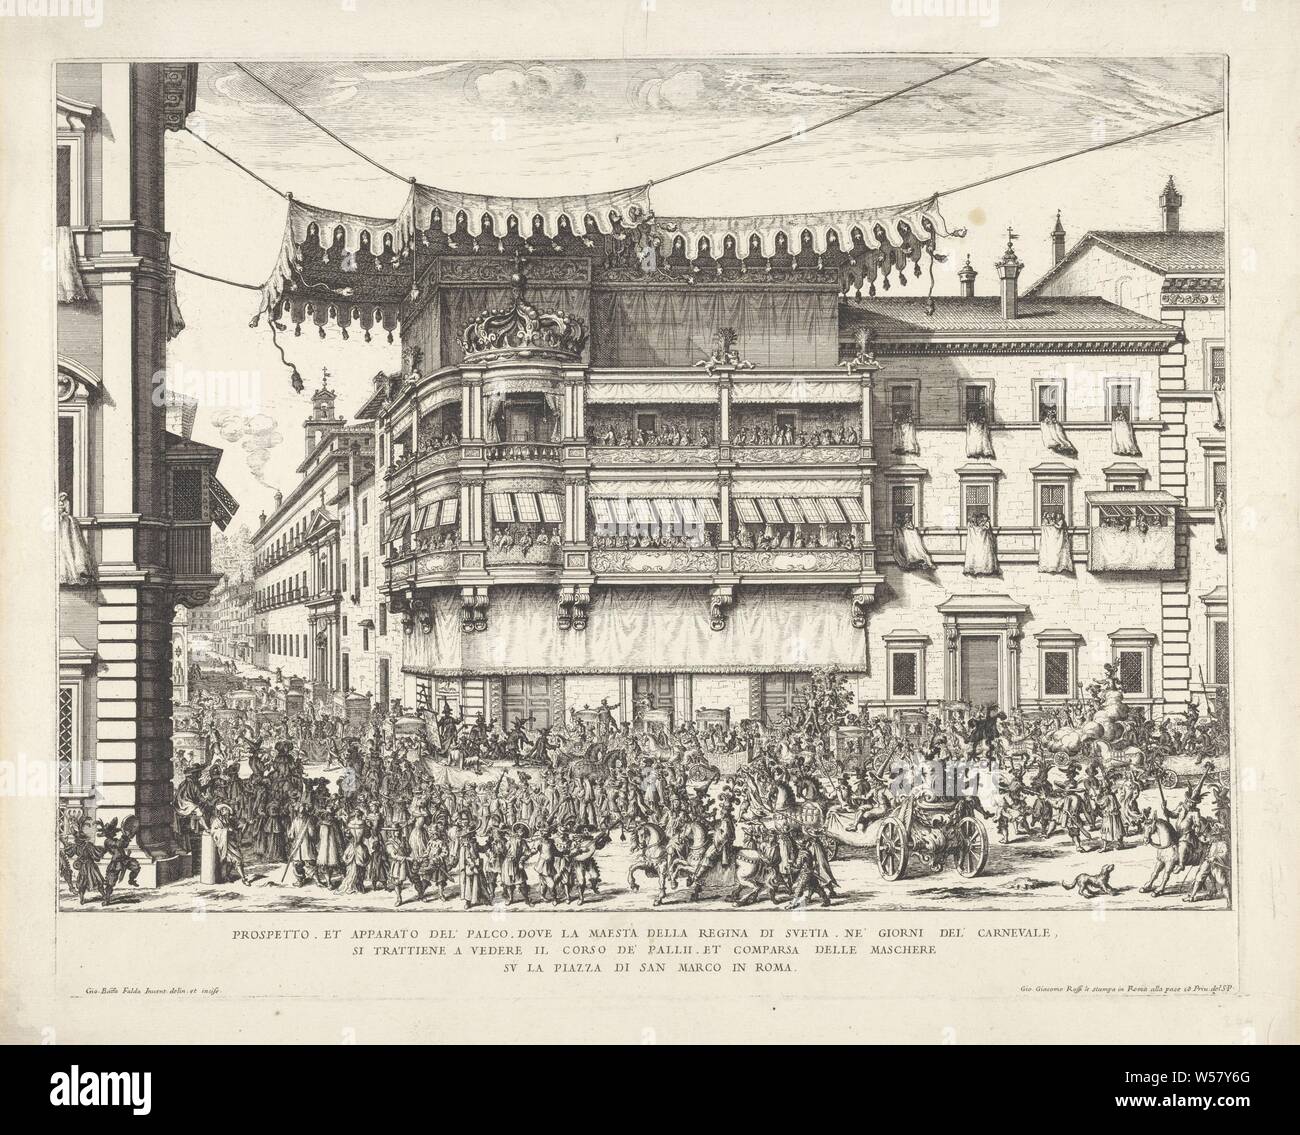 Design for carnival scaffolding for Christina of Sweden, View of the Piazza di San Marco in Rome with a scaffolding specially designed for Queen Christina of Sweden. From this scaffolding she could view the carnival festivities. In the foreground a crowd of partying people and different carriages. Italian text in lower margin., Carnival, Shrovetide (non-liturgical celebration), urban housing, Rome, Piazza di San Marco (Rome), Christina (Queen of Sweden), Giovanni Battista Falda (mentioned on object), 1653 - 1691, paper, etching, h 380 mm × w 476 mm Stock Photo